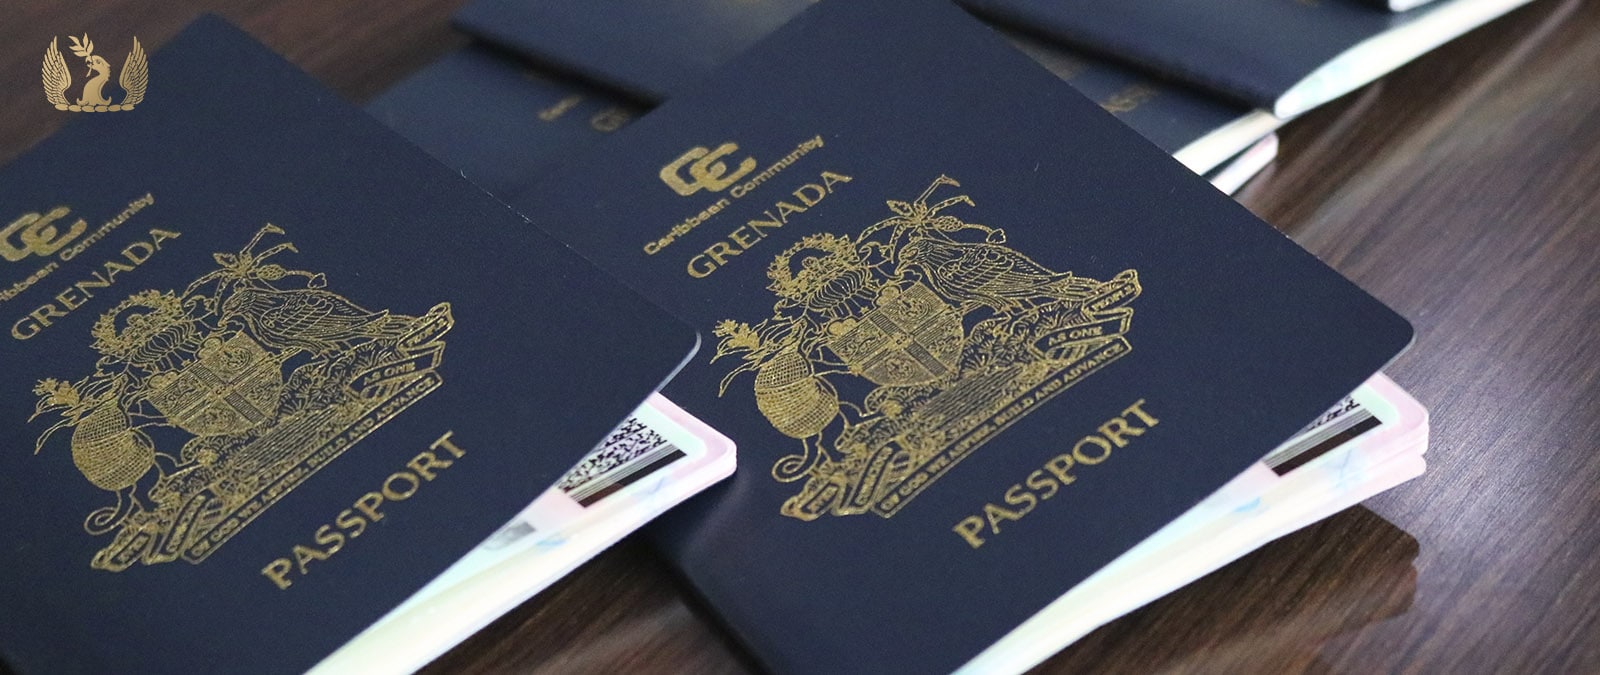 Grenada passport allows visa-free and visa-on-arrival travel to 120+ countries.